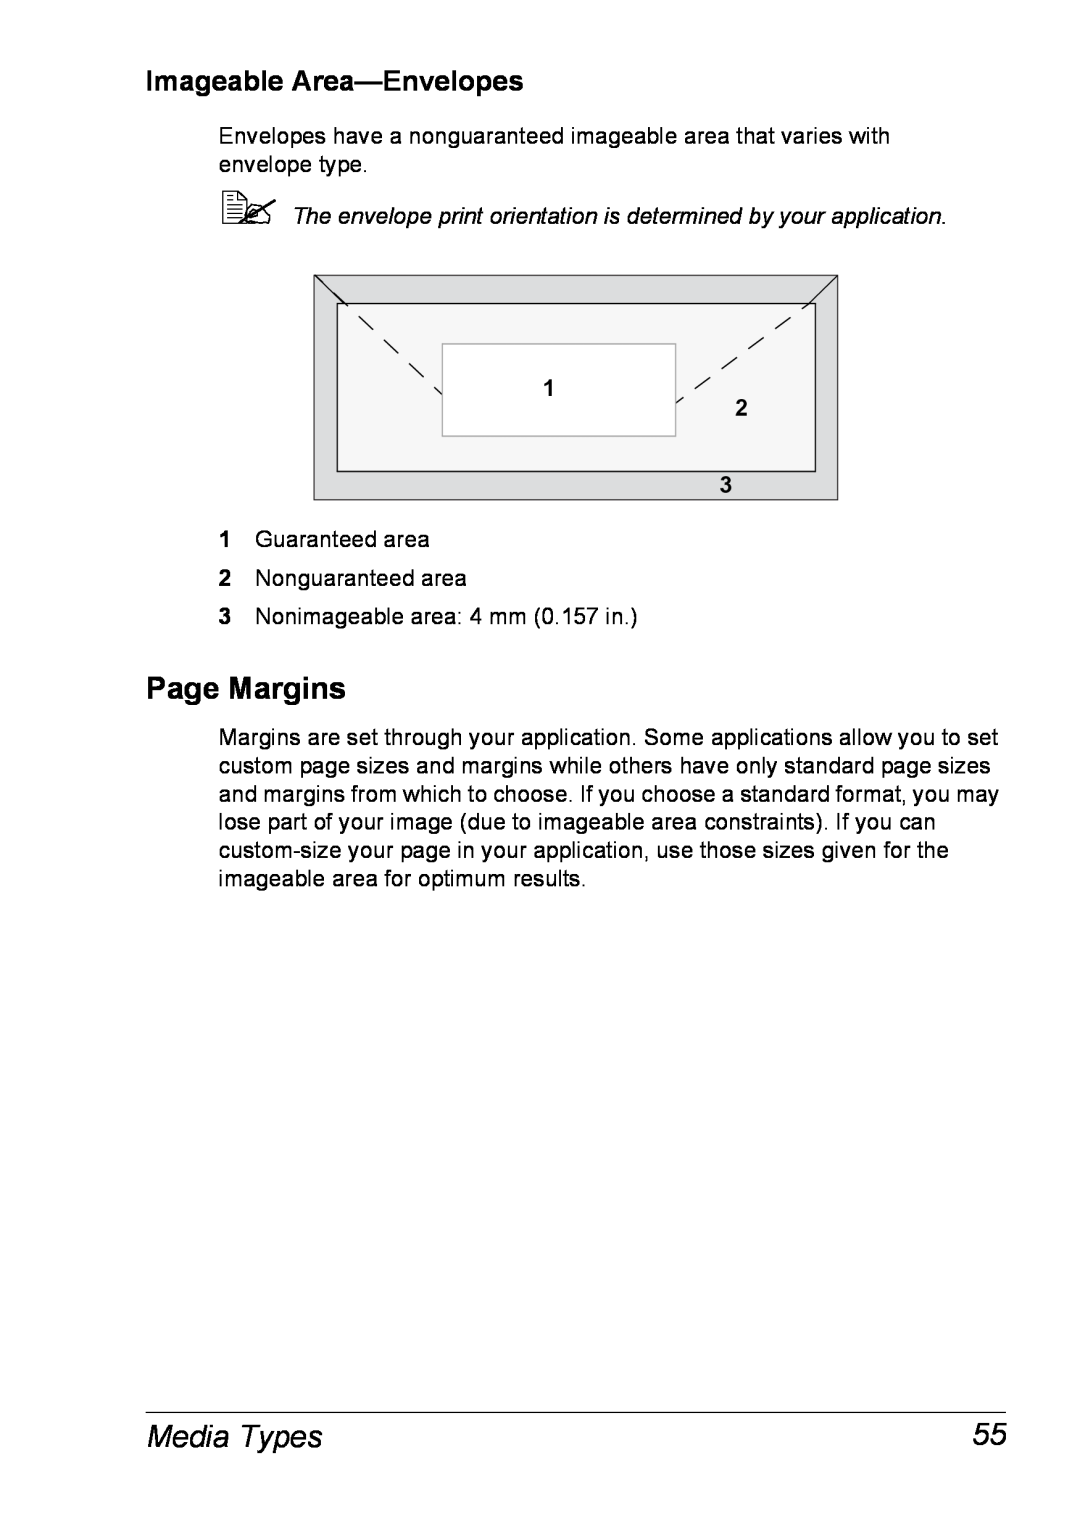 Xerox 6120 manual Page Margins, Imageable Area-Envelopes, Media Types 